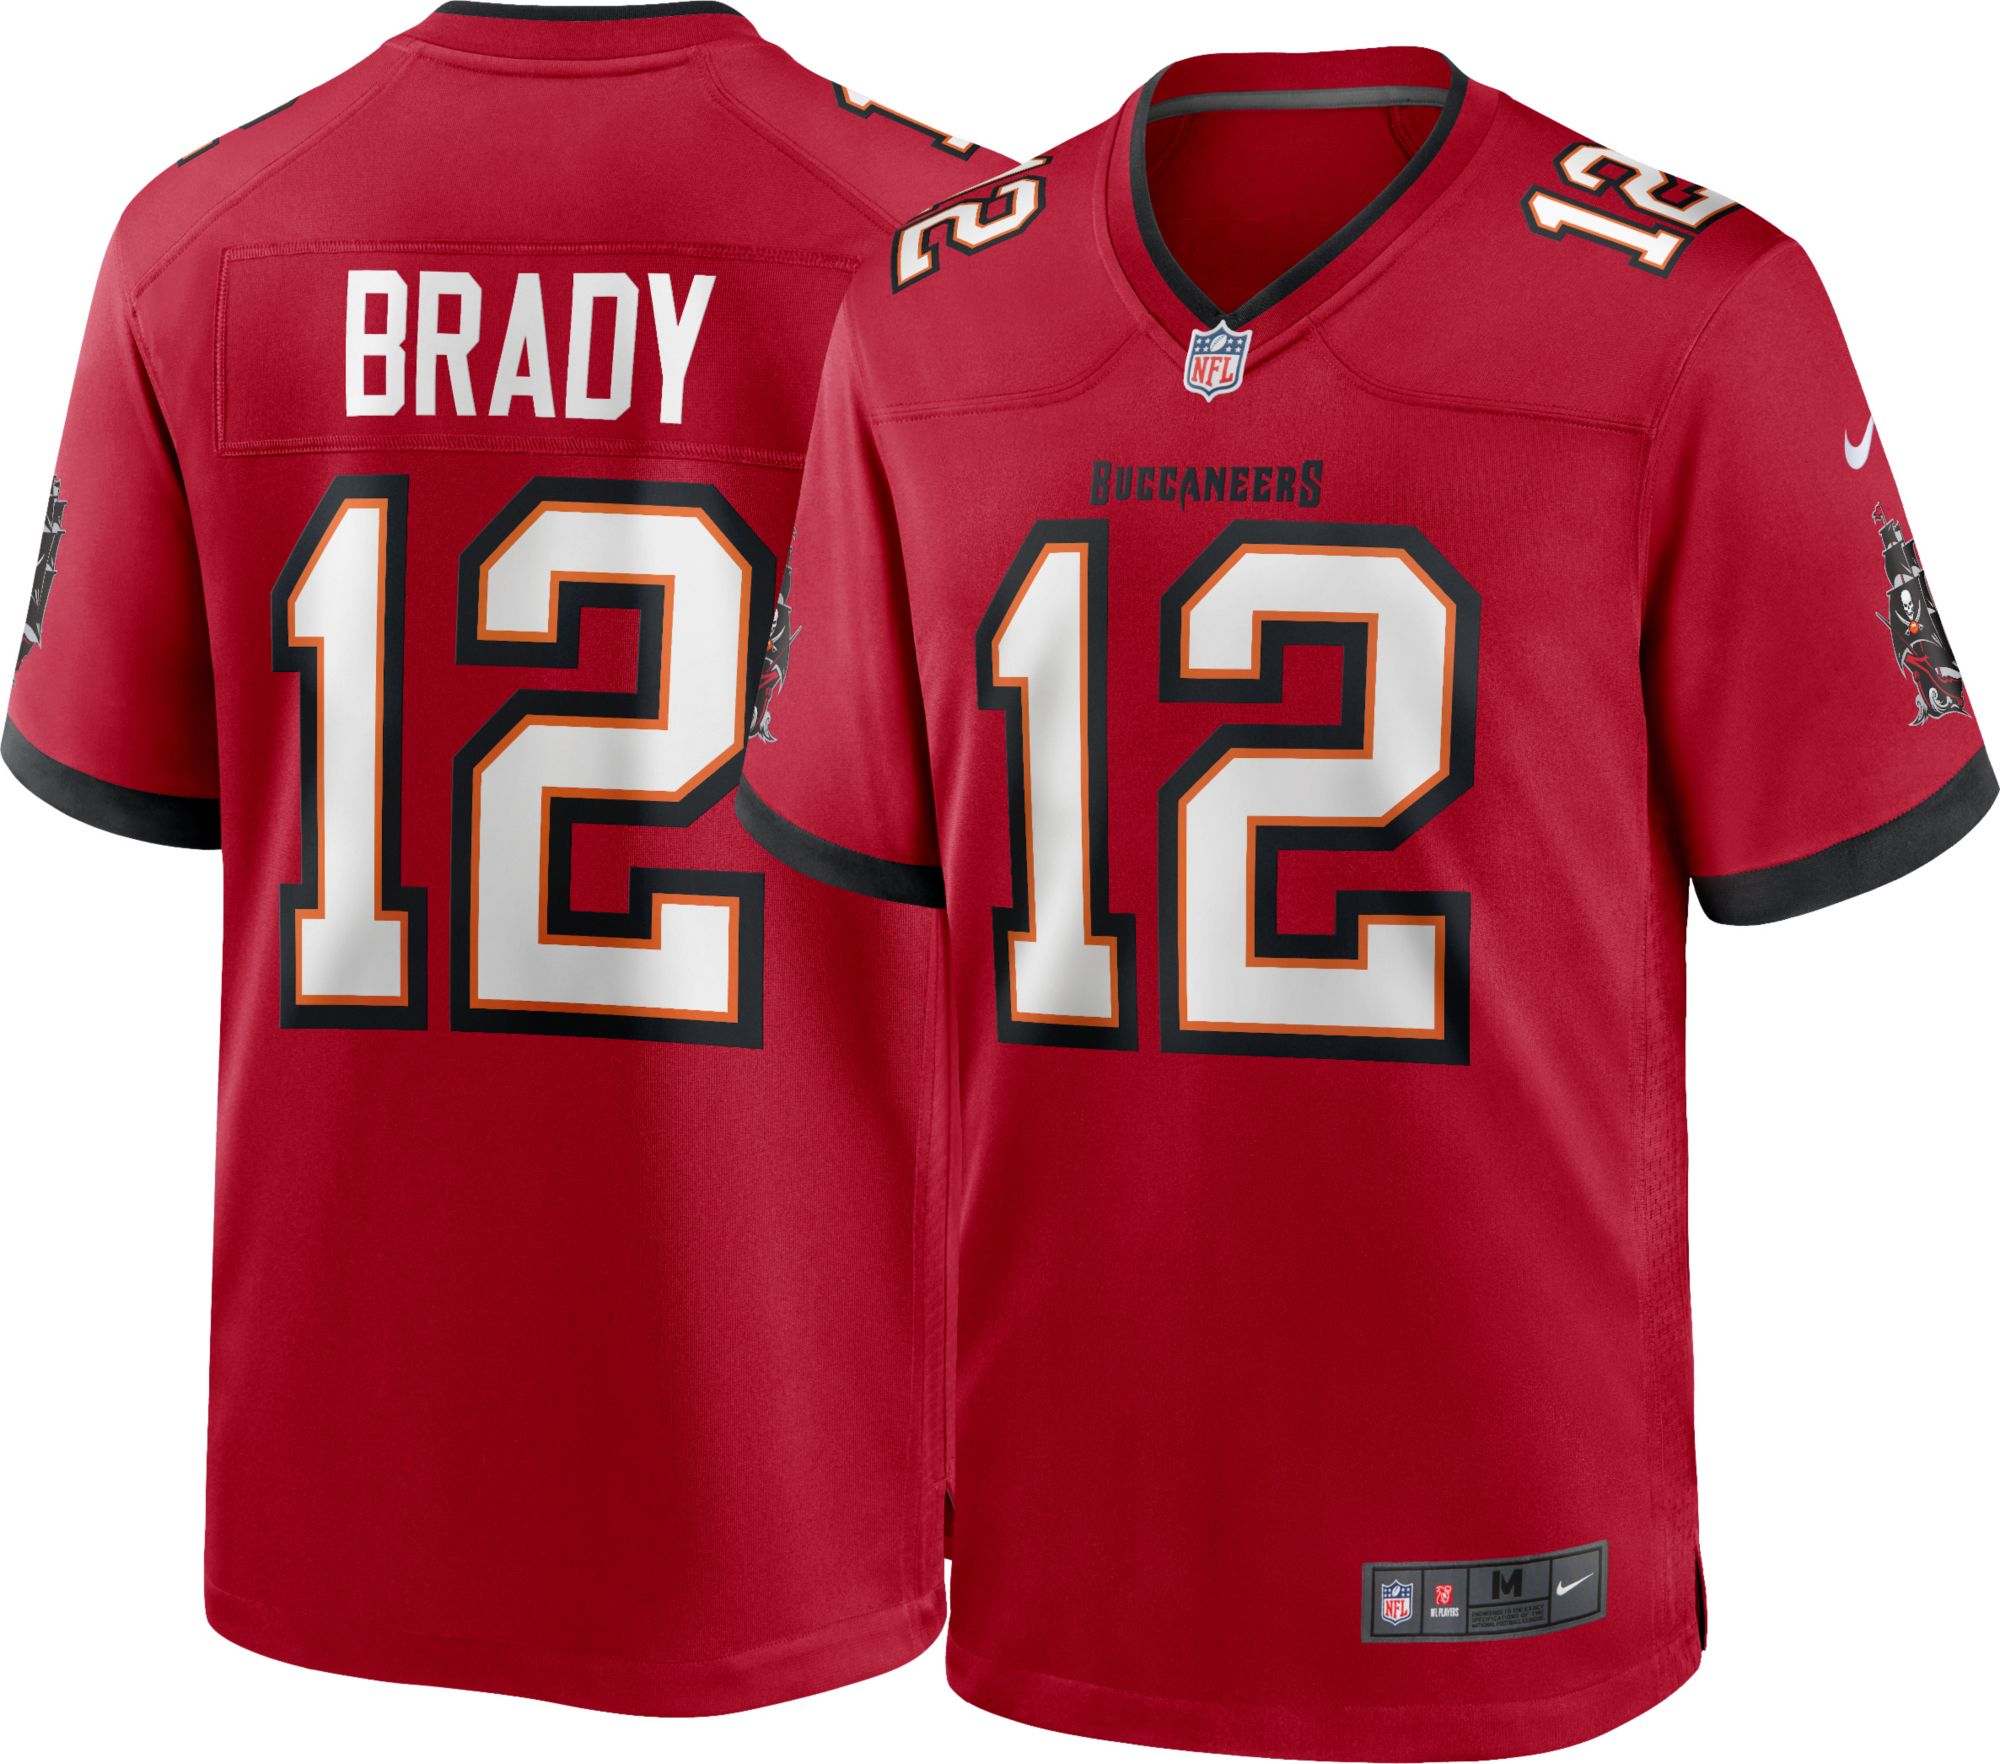 Tampa Bay Buccaneers Nike Reflective Limited Jersey - Tom Brady 12